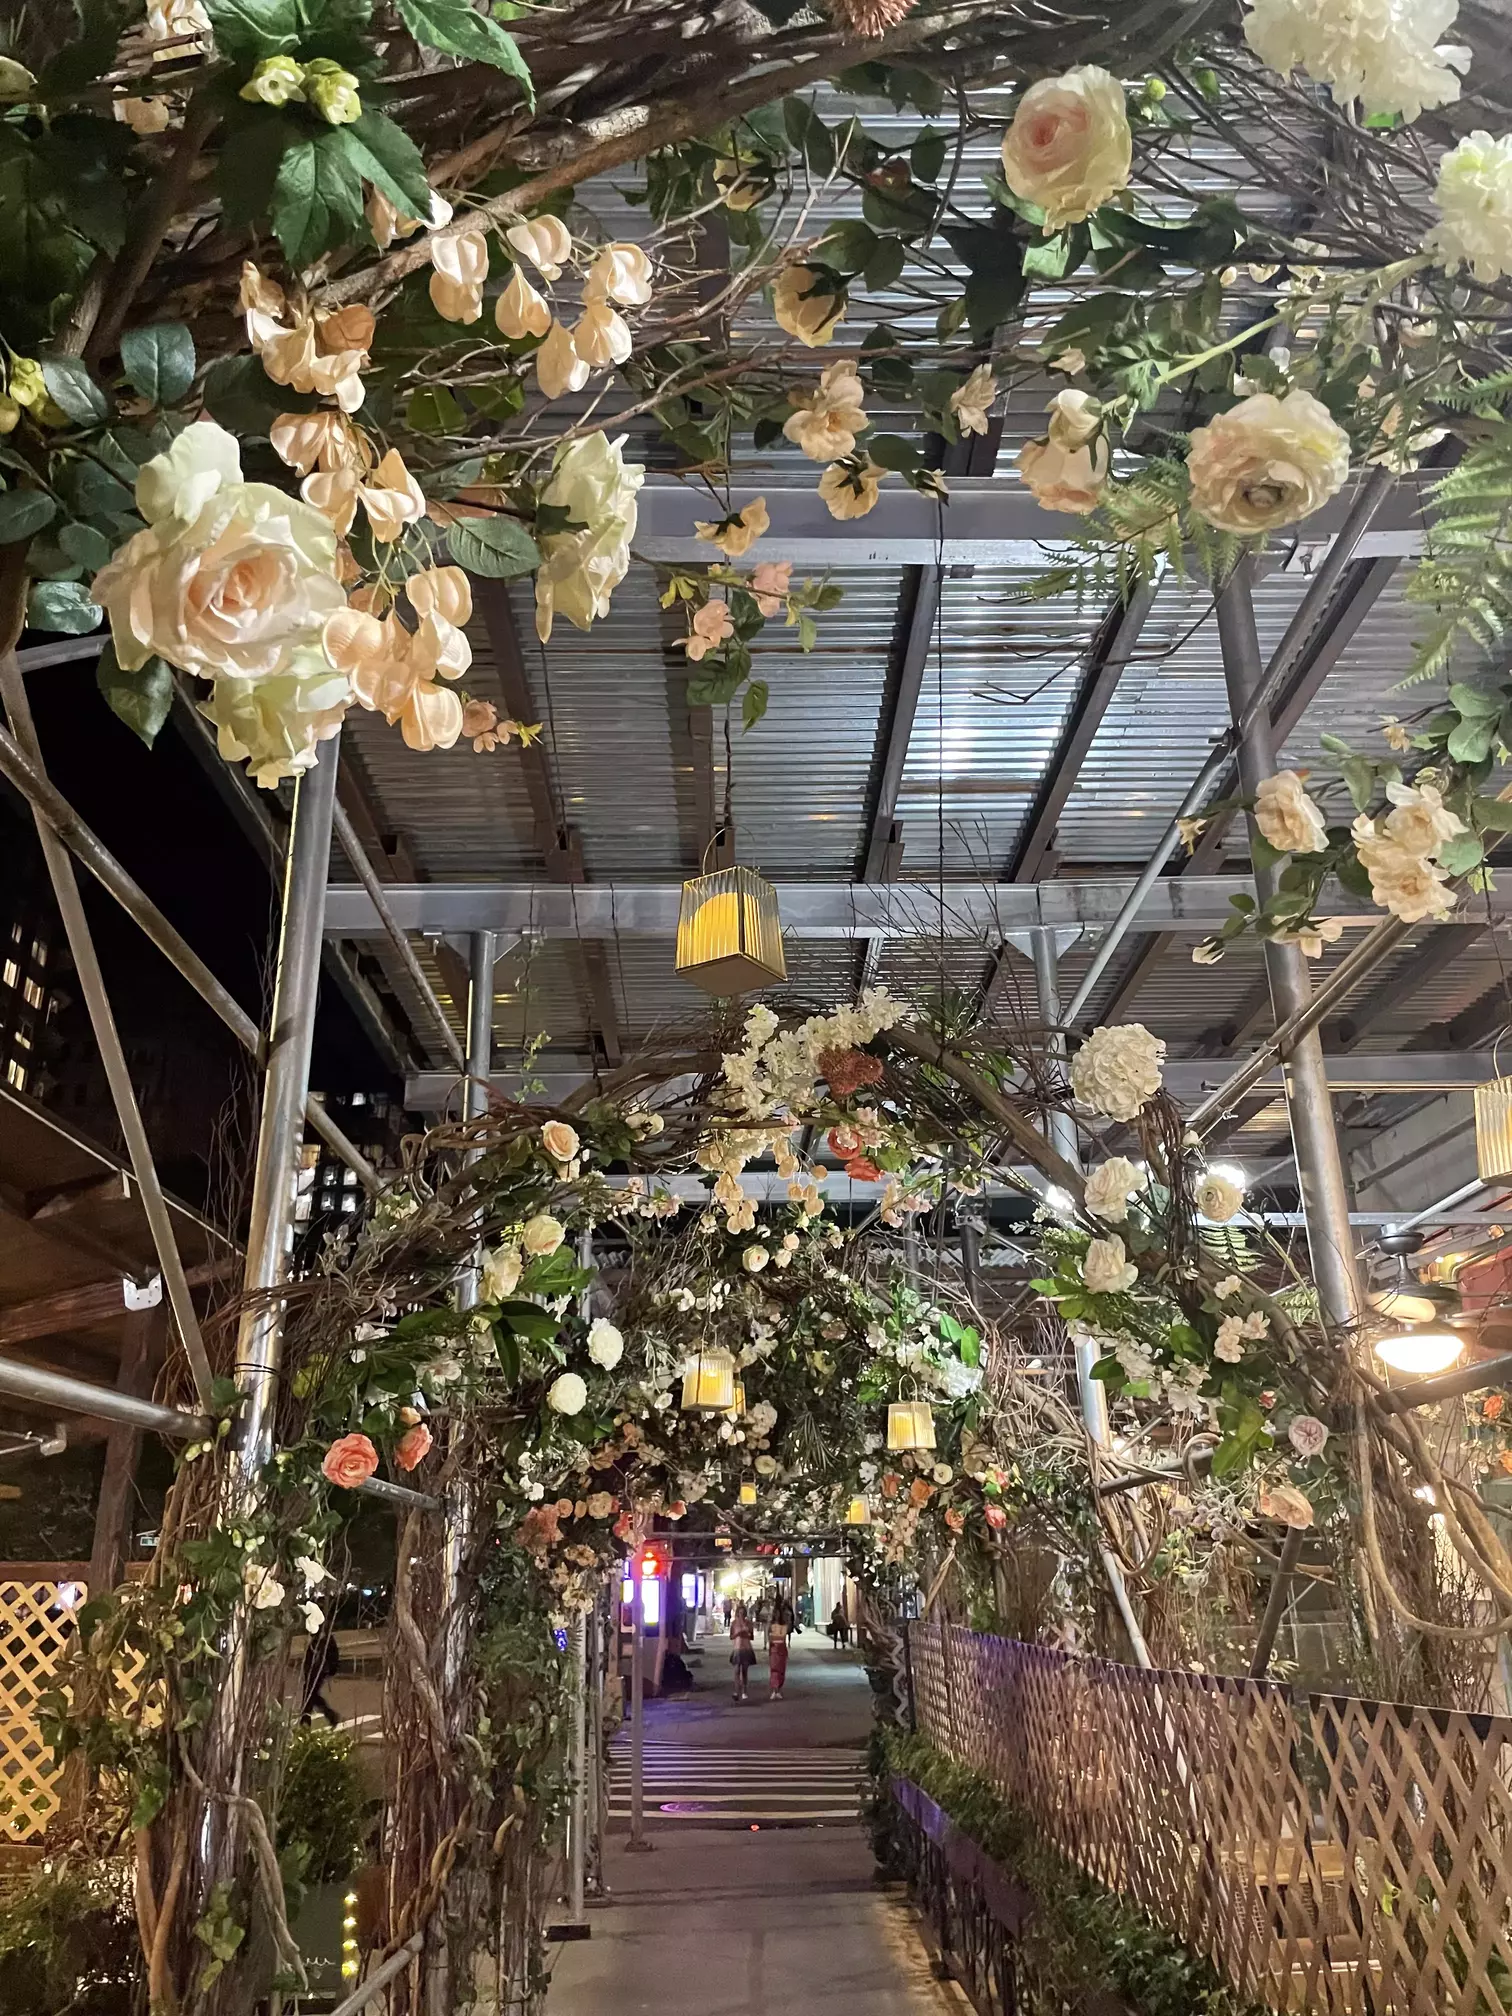 Cibo e Vino integrated their terrace (left) with their shanty (right) via the building scaffolding (above) and created a natural arch with flowers